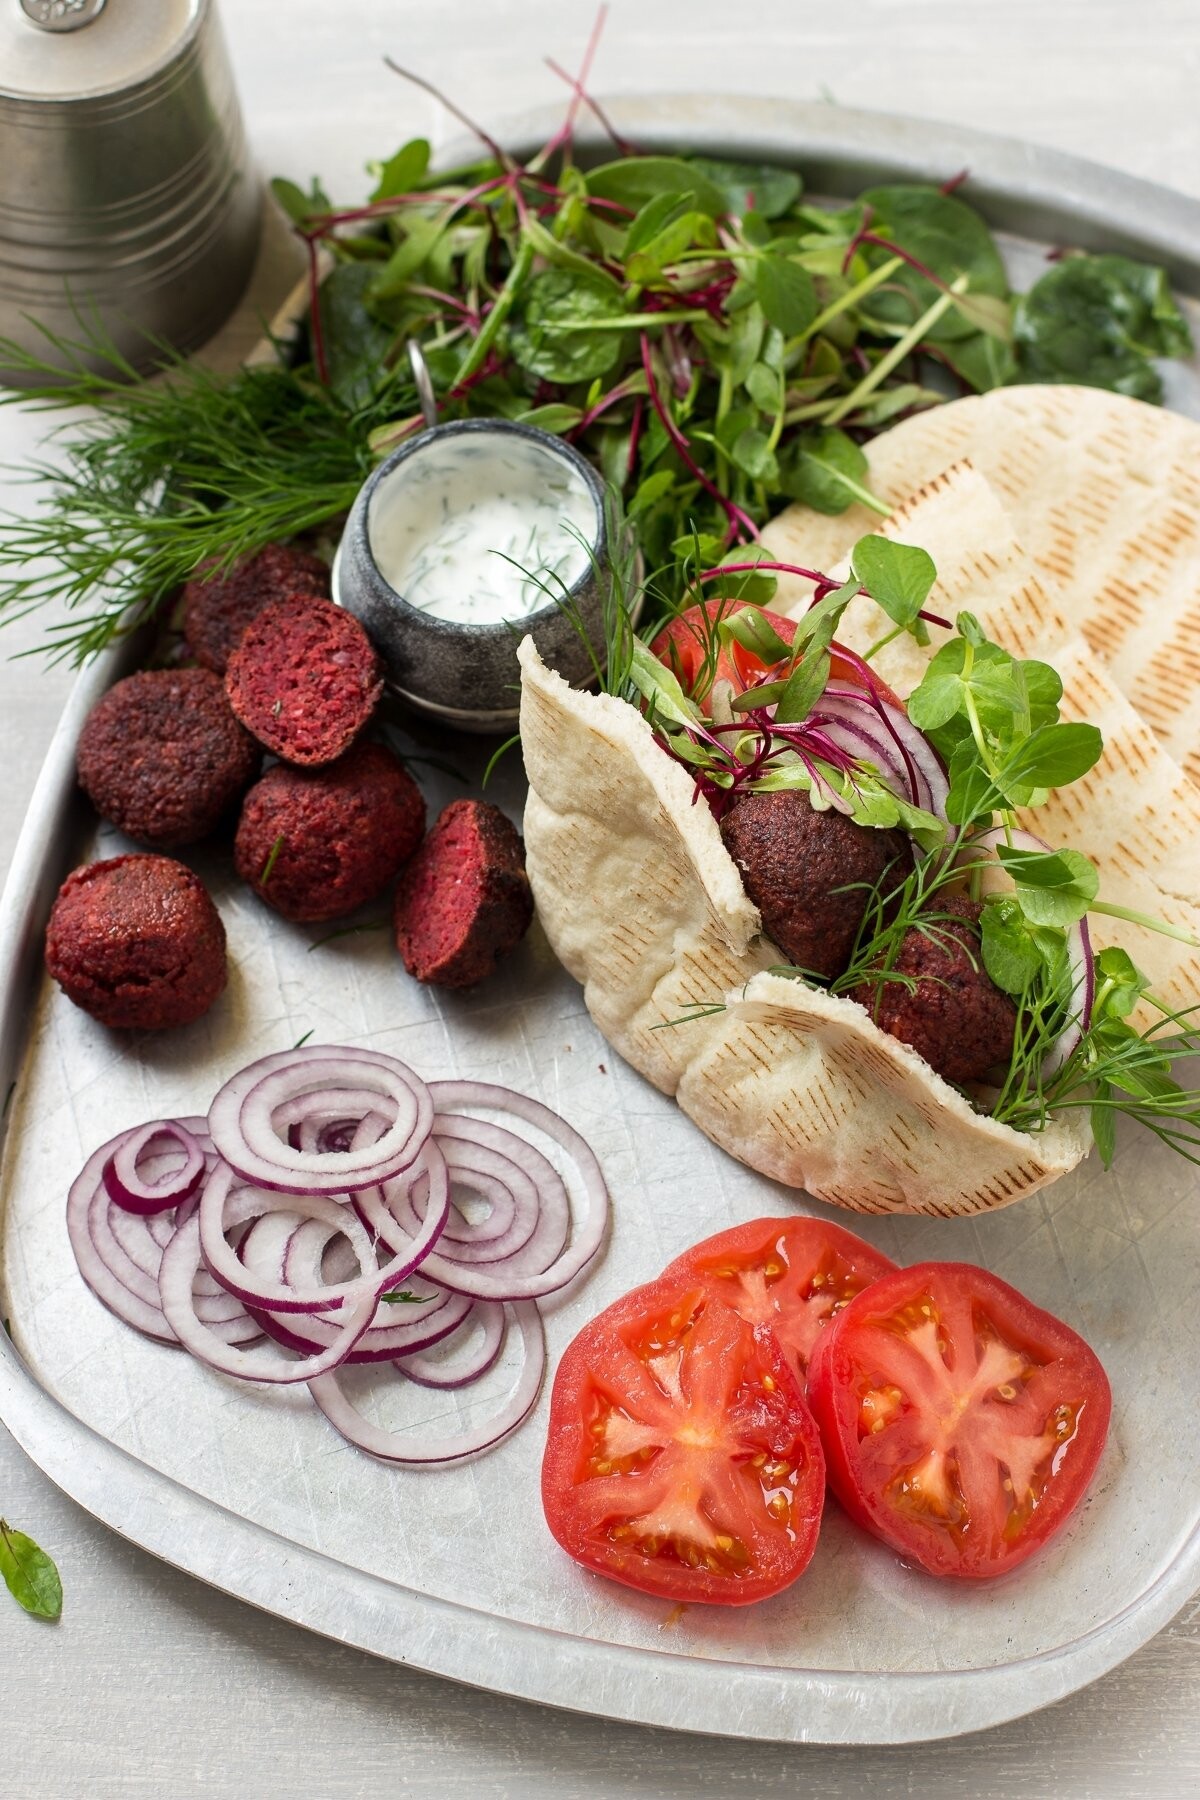 This is a photo of beetroot falafel served with pita, red onion, tomatoes, young beet greens and garlic dill yogurt. I wanted to emphasize the beautiful dark pink color of the falafel as well as the freshness of the veggies, that's why I used neutral background and simple props.